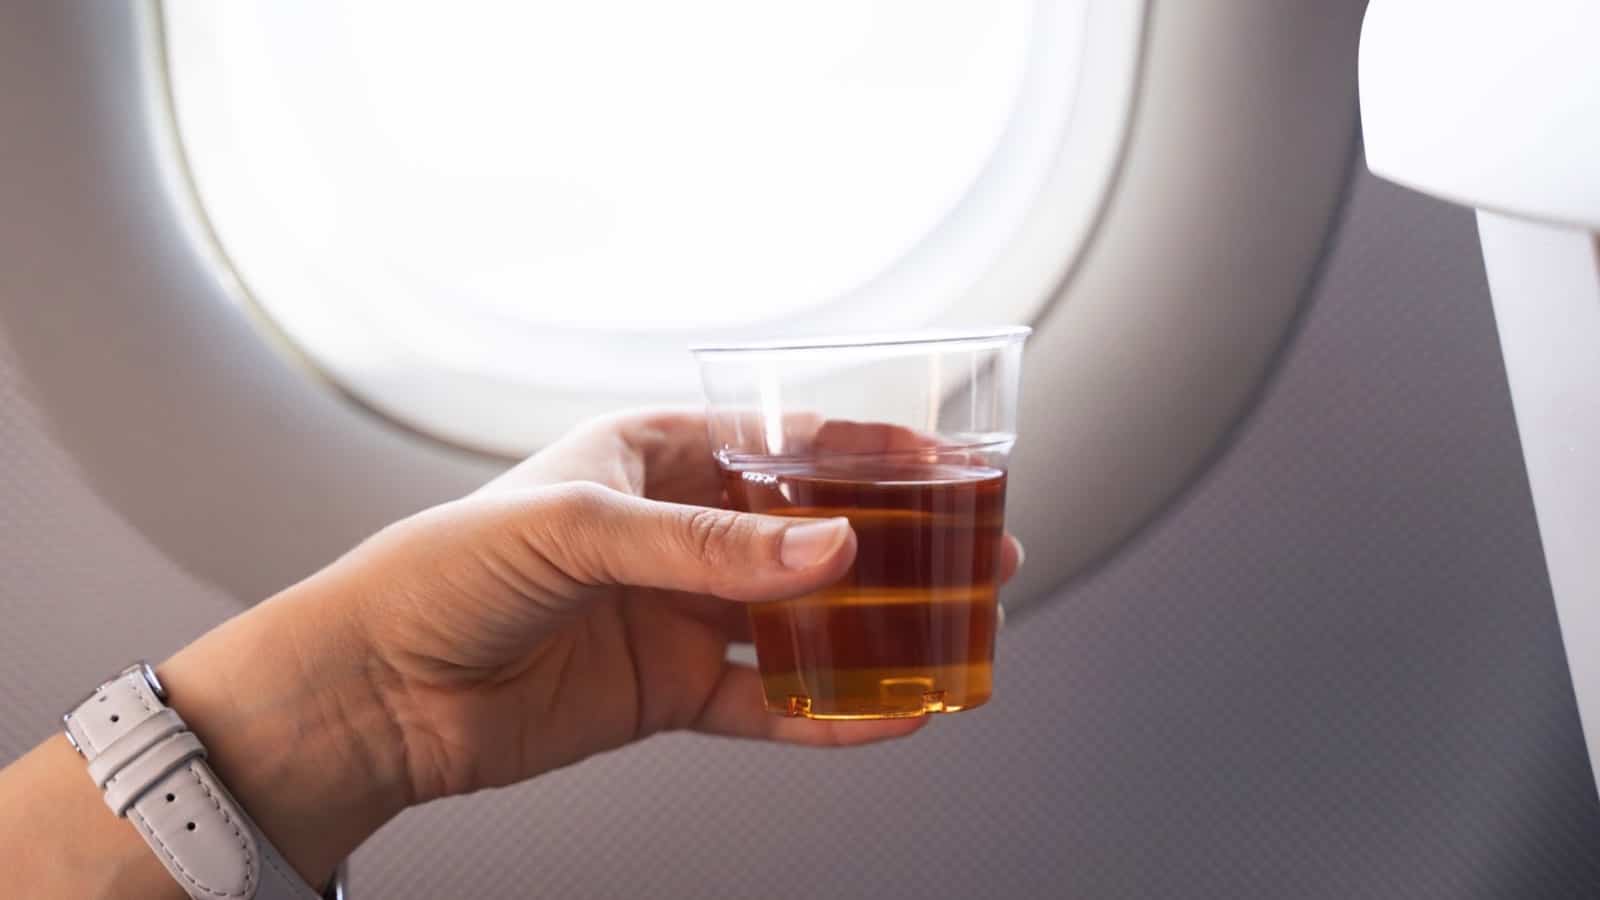 Drinking alcohol in plane